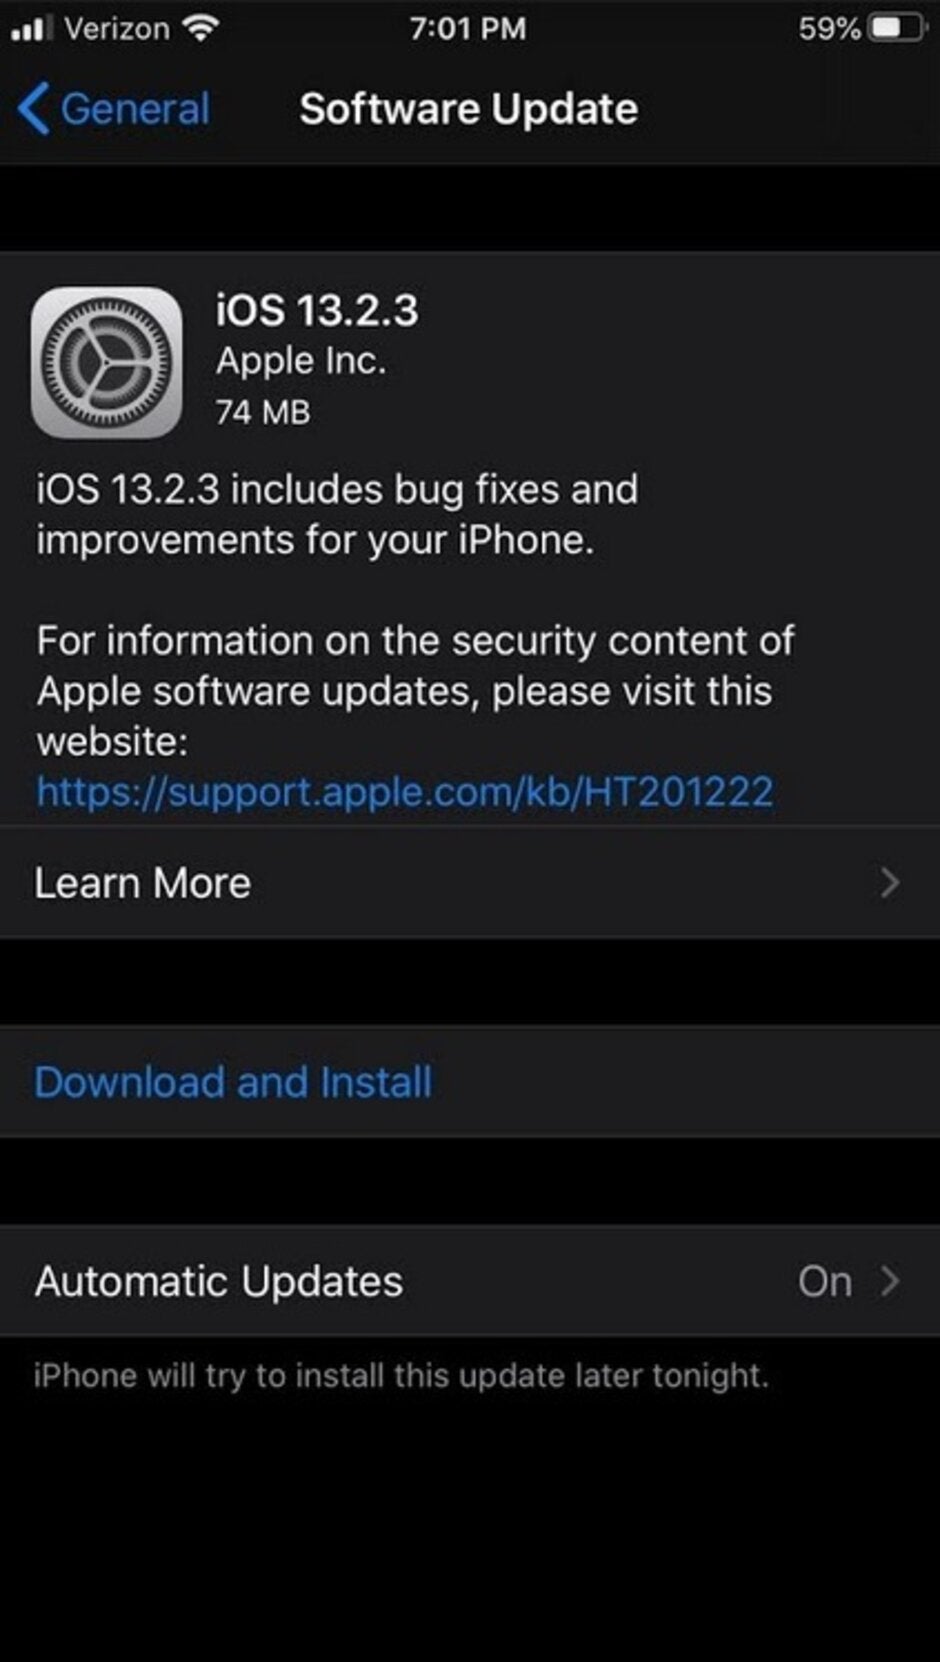 Apple disseminates a minor update to kill some annoying bugs - Apple releases iOS and iPadOS 13.2.3 to exterminate some bugs